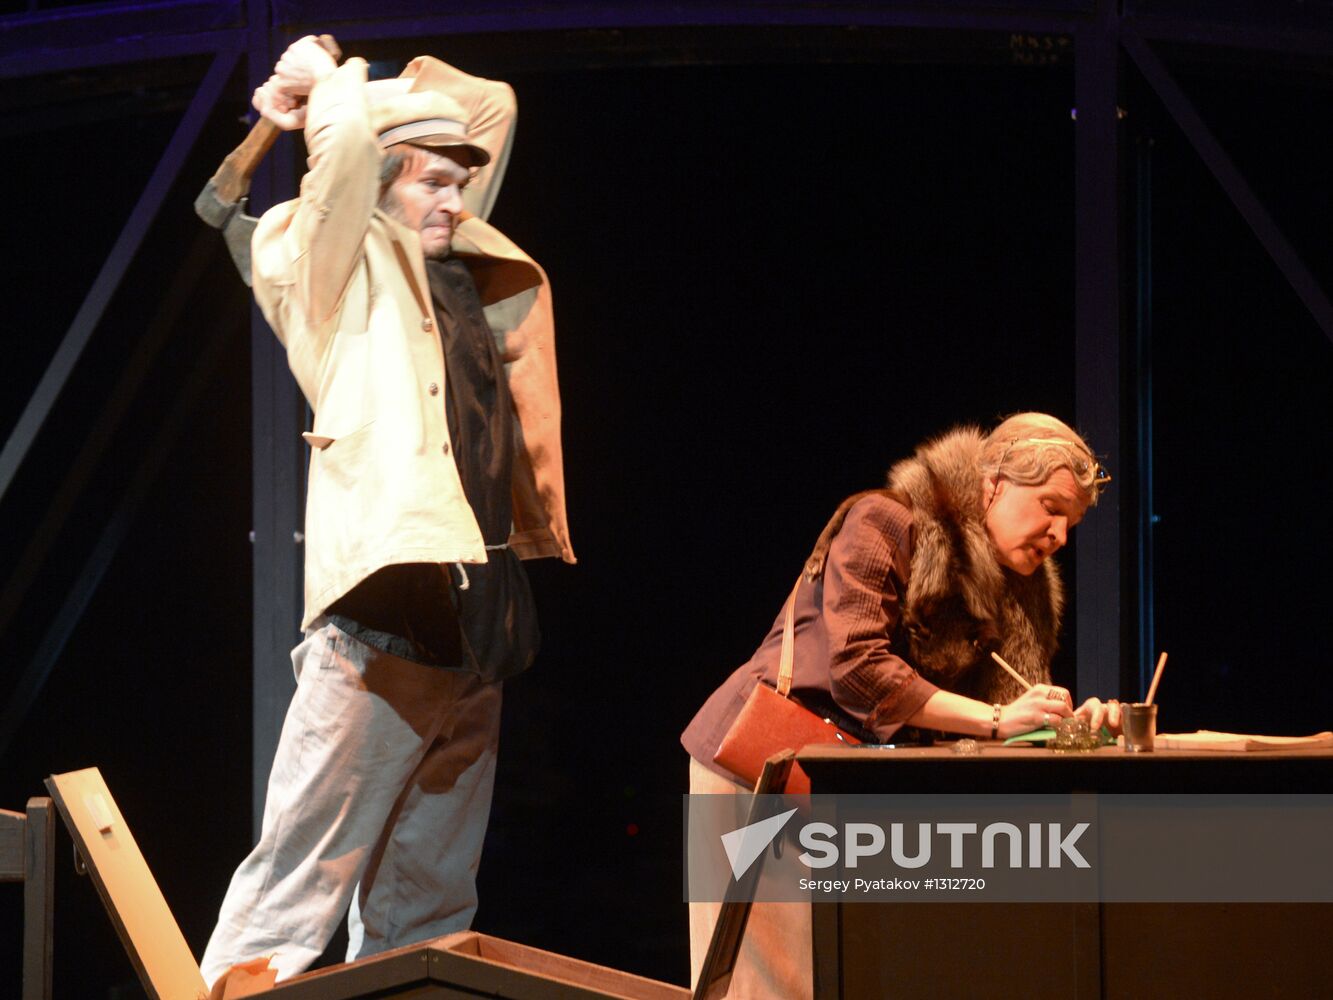 Dress rehearsal of play R.R.R. at Mossovet Theater